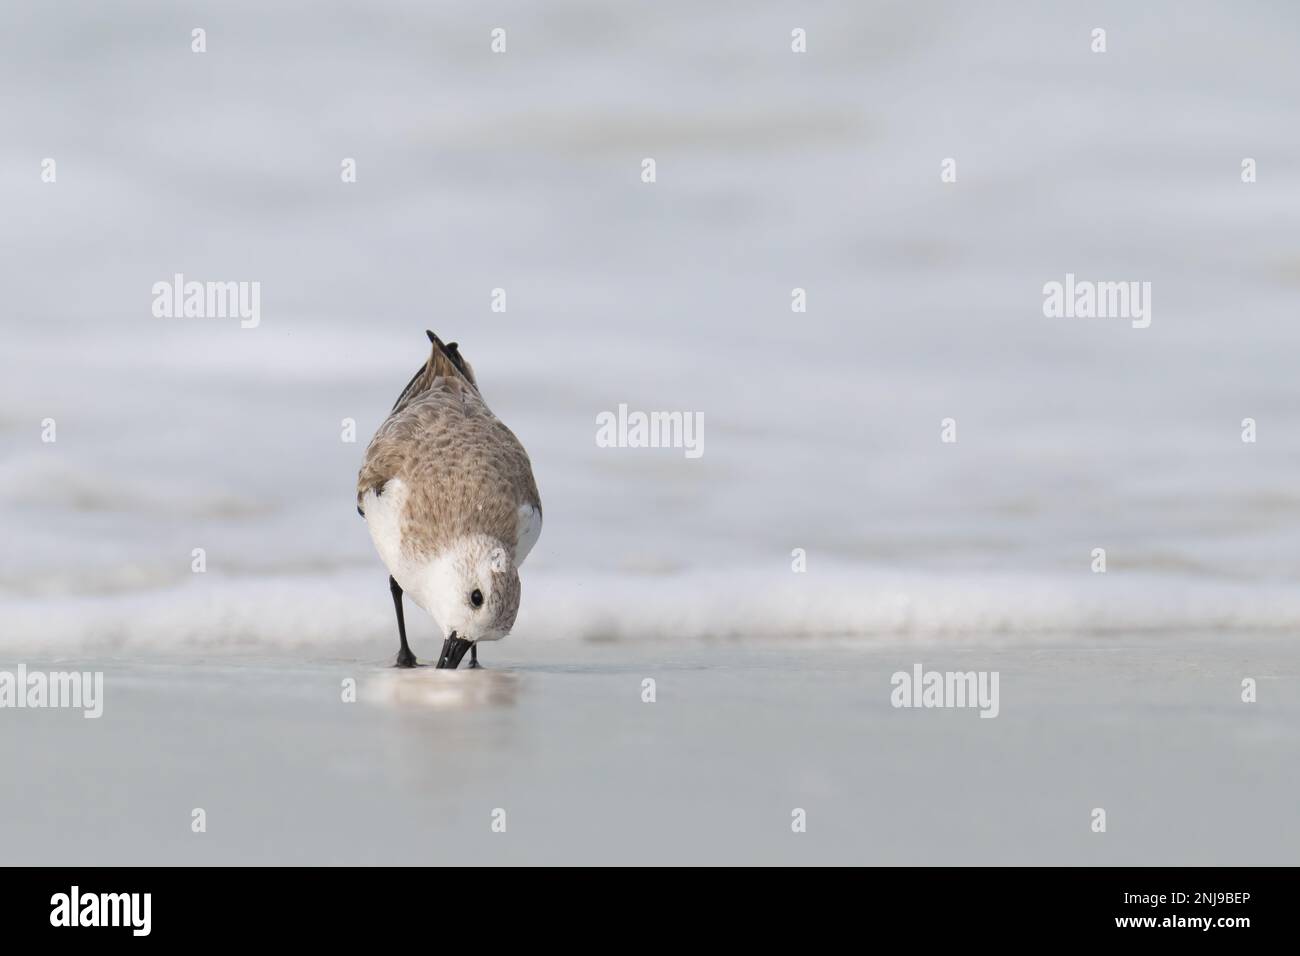 A sanderling pokes its bill into the sand in search of a meal at Fort De Soto Park in St. Petersburg, Florida. Stock Photo